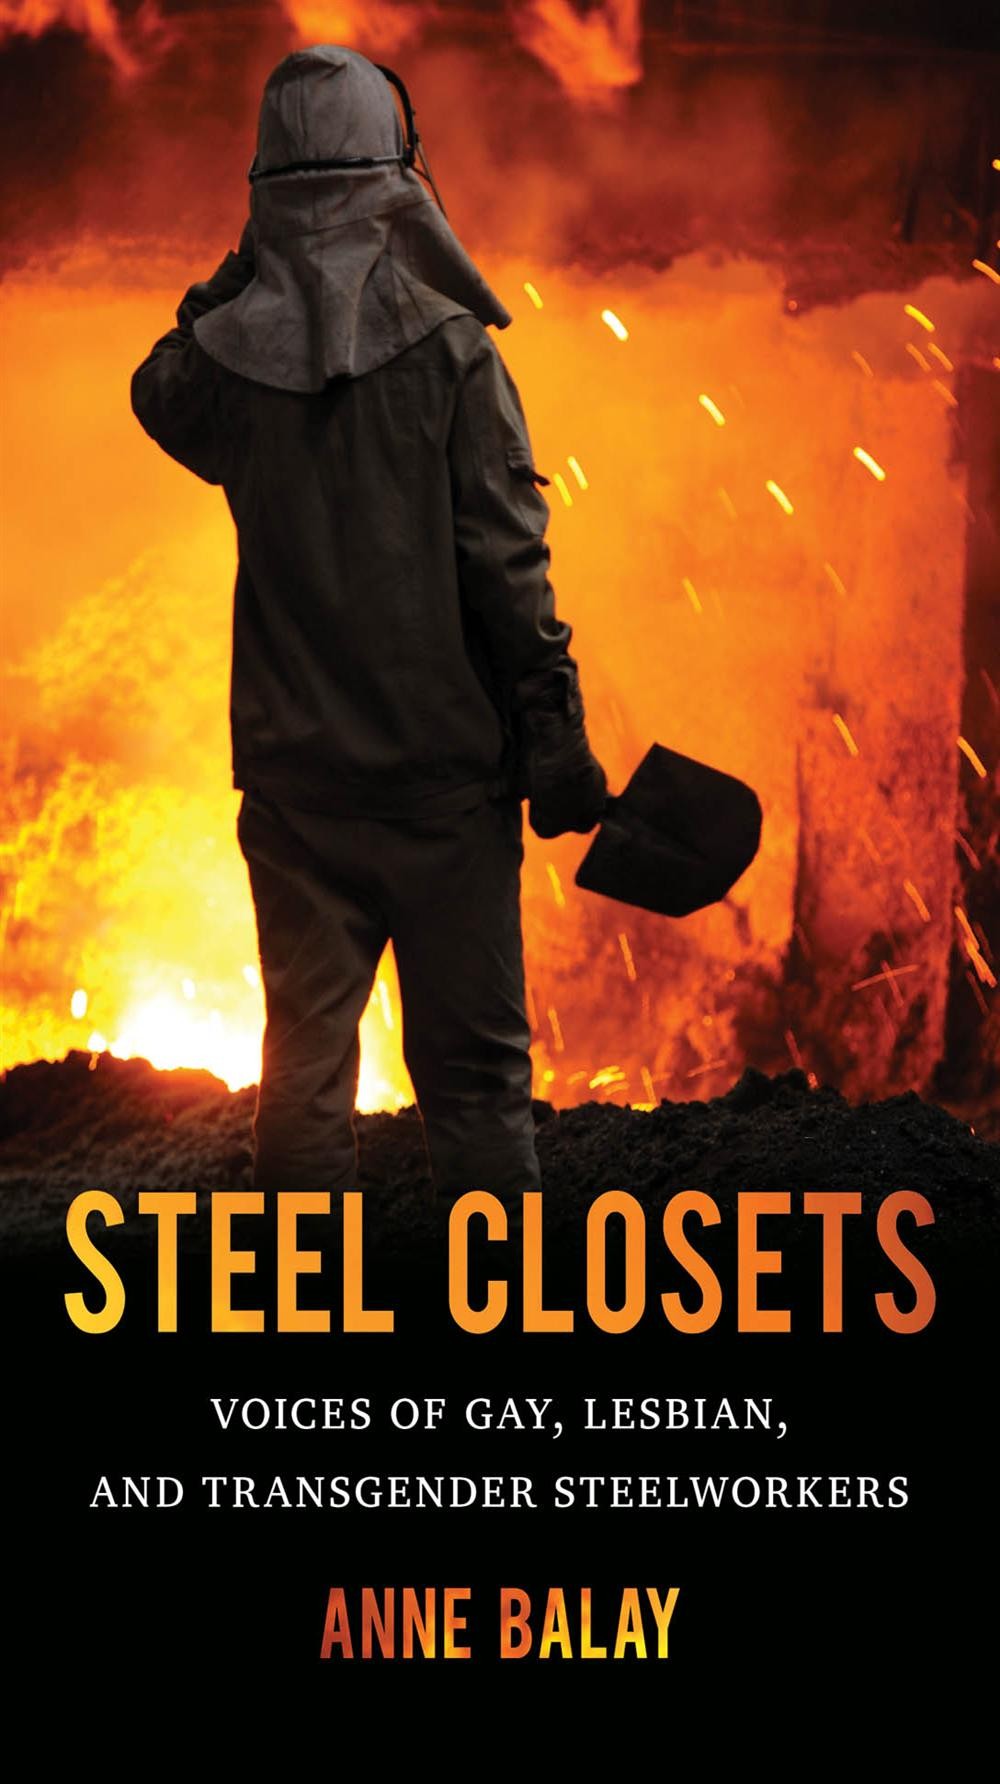 Steel Closets: Voice of Gay, Lesbian, and Transgender Steelworkers